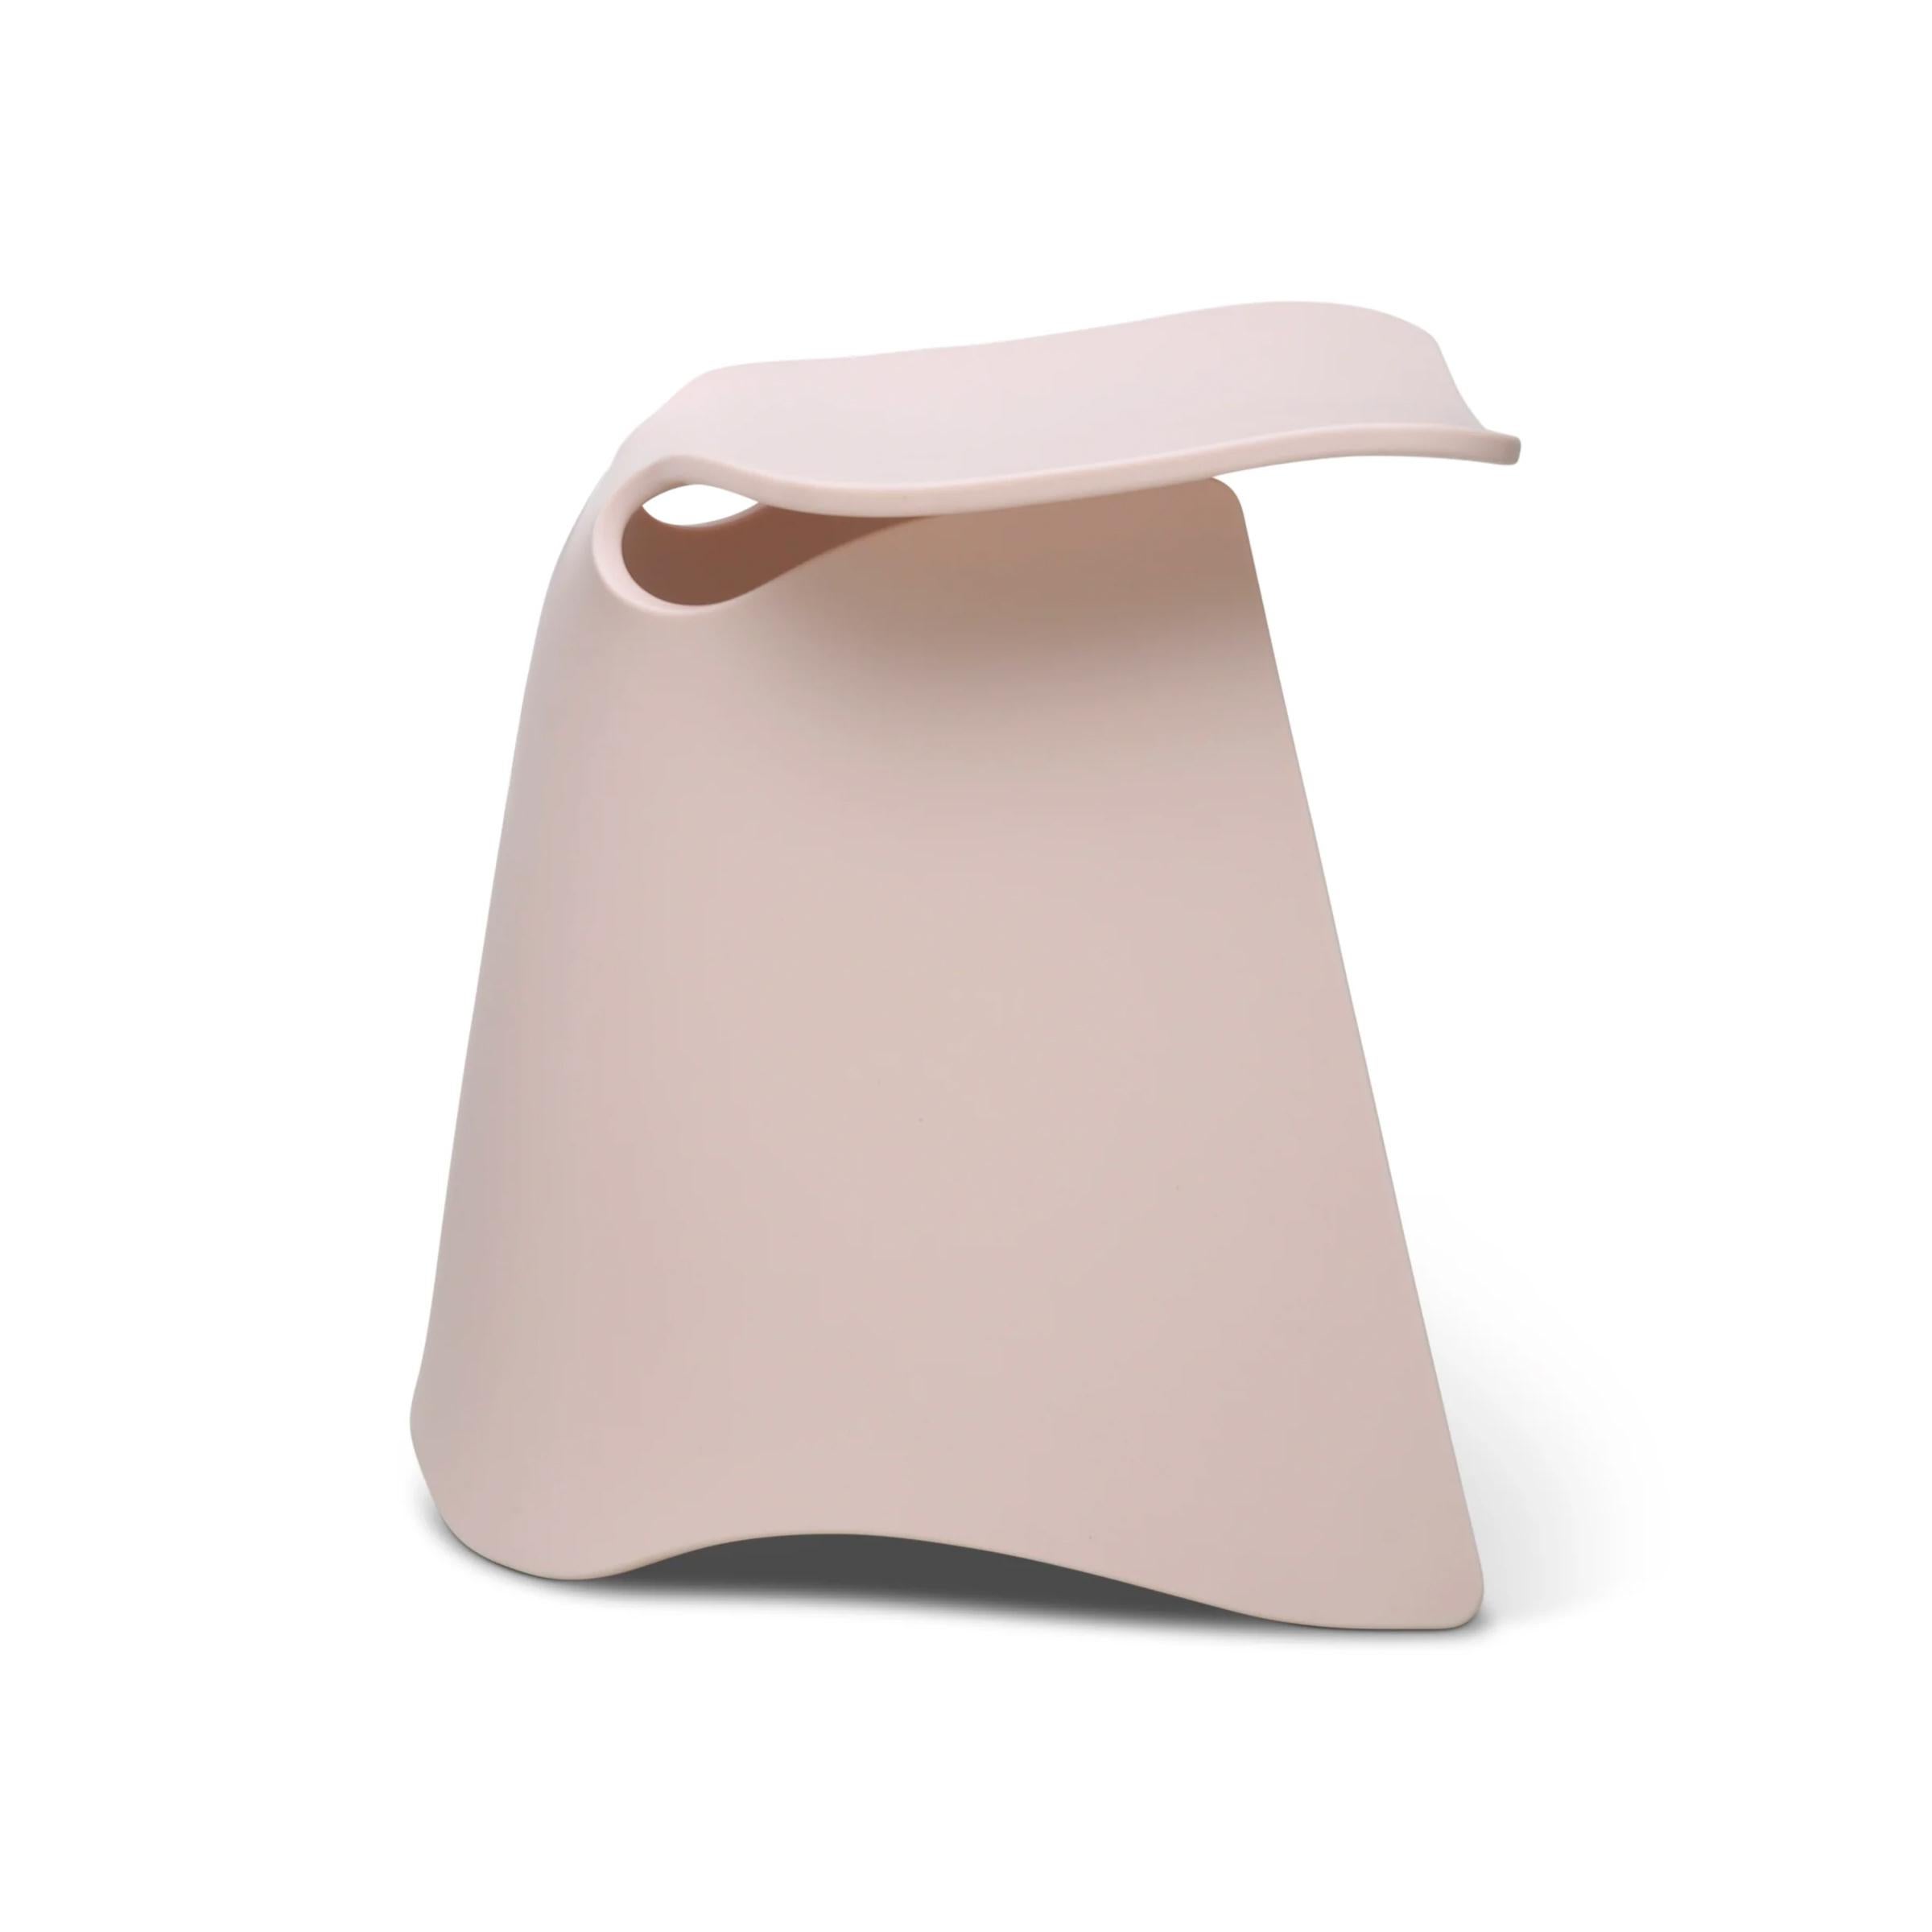 Flo stool is made of one single piece of thermoformed Corian, a durable countertop material with a stone-like feel. Inspired by the form of a cresting wave, the folds and curves create a structural base and comfortable seat and give the piece an